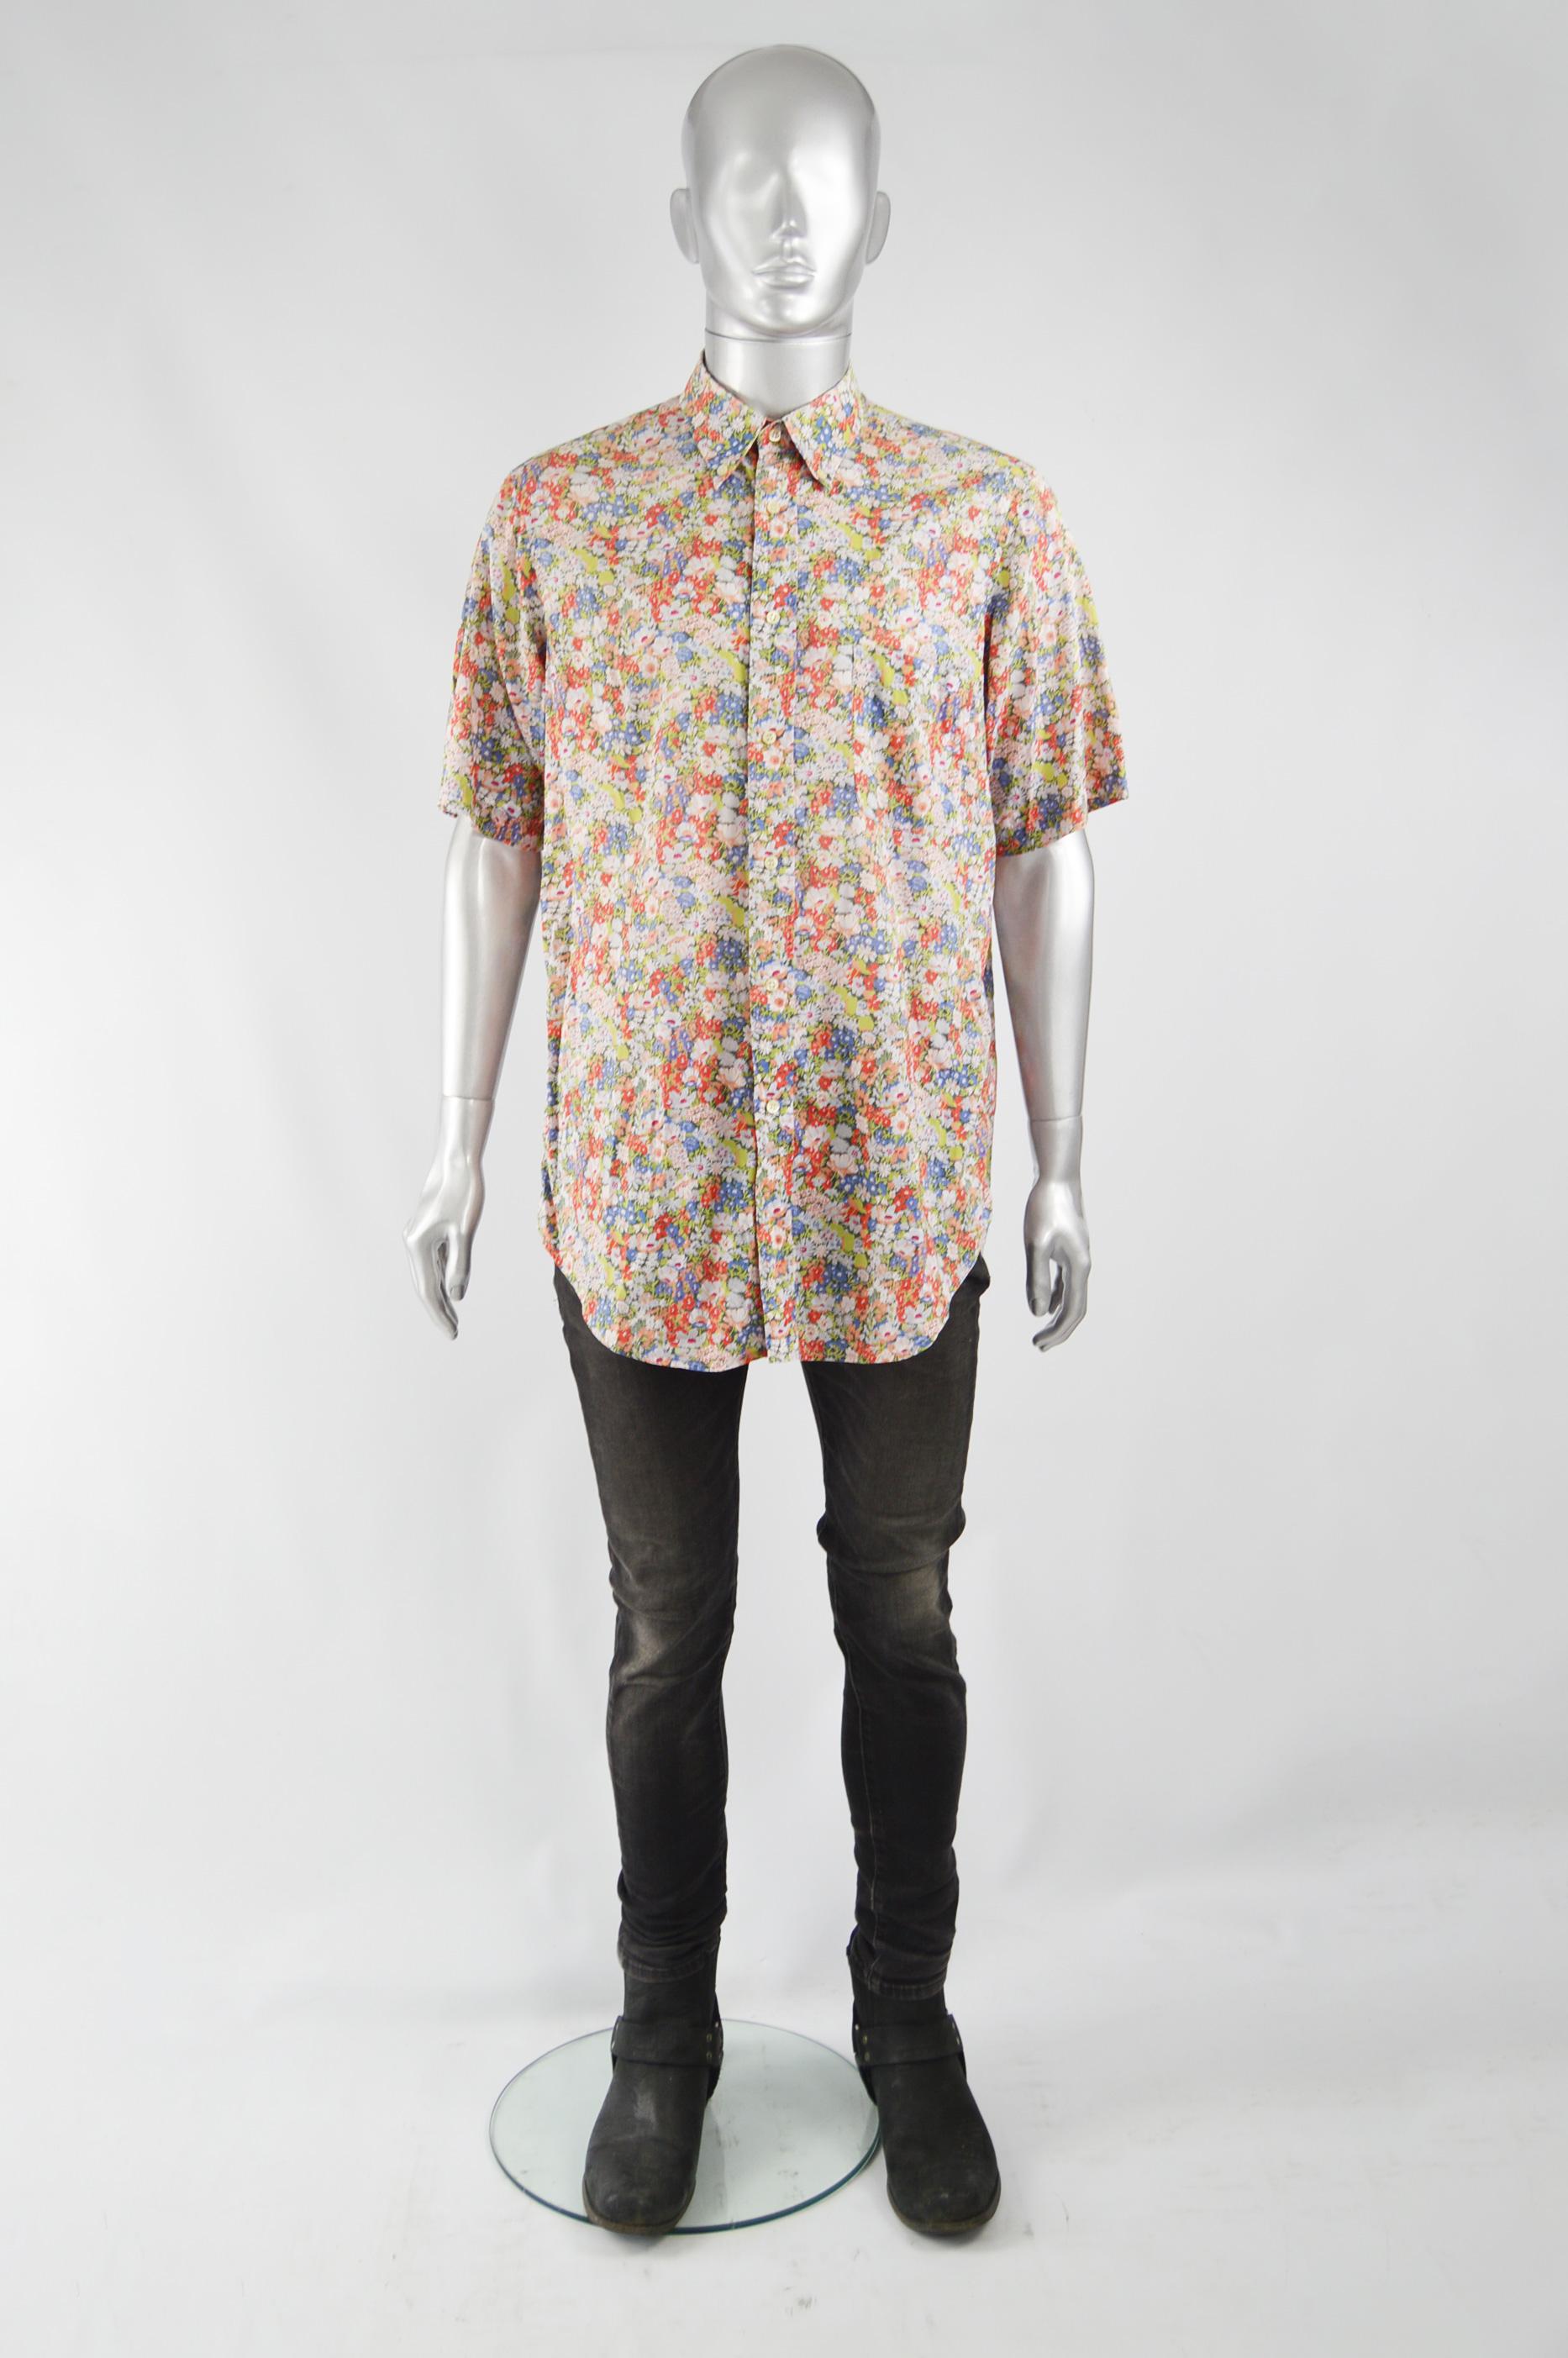 An amazing floral printed cotton shirt from the 80s by luxury French fashion house Cacharel, with a button down collar and short sleeves. 

Size: Label has faded, fits like an XL to XXL. Please check measurements. 
Chest - 46” / 117cm 
Waist - 46” /